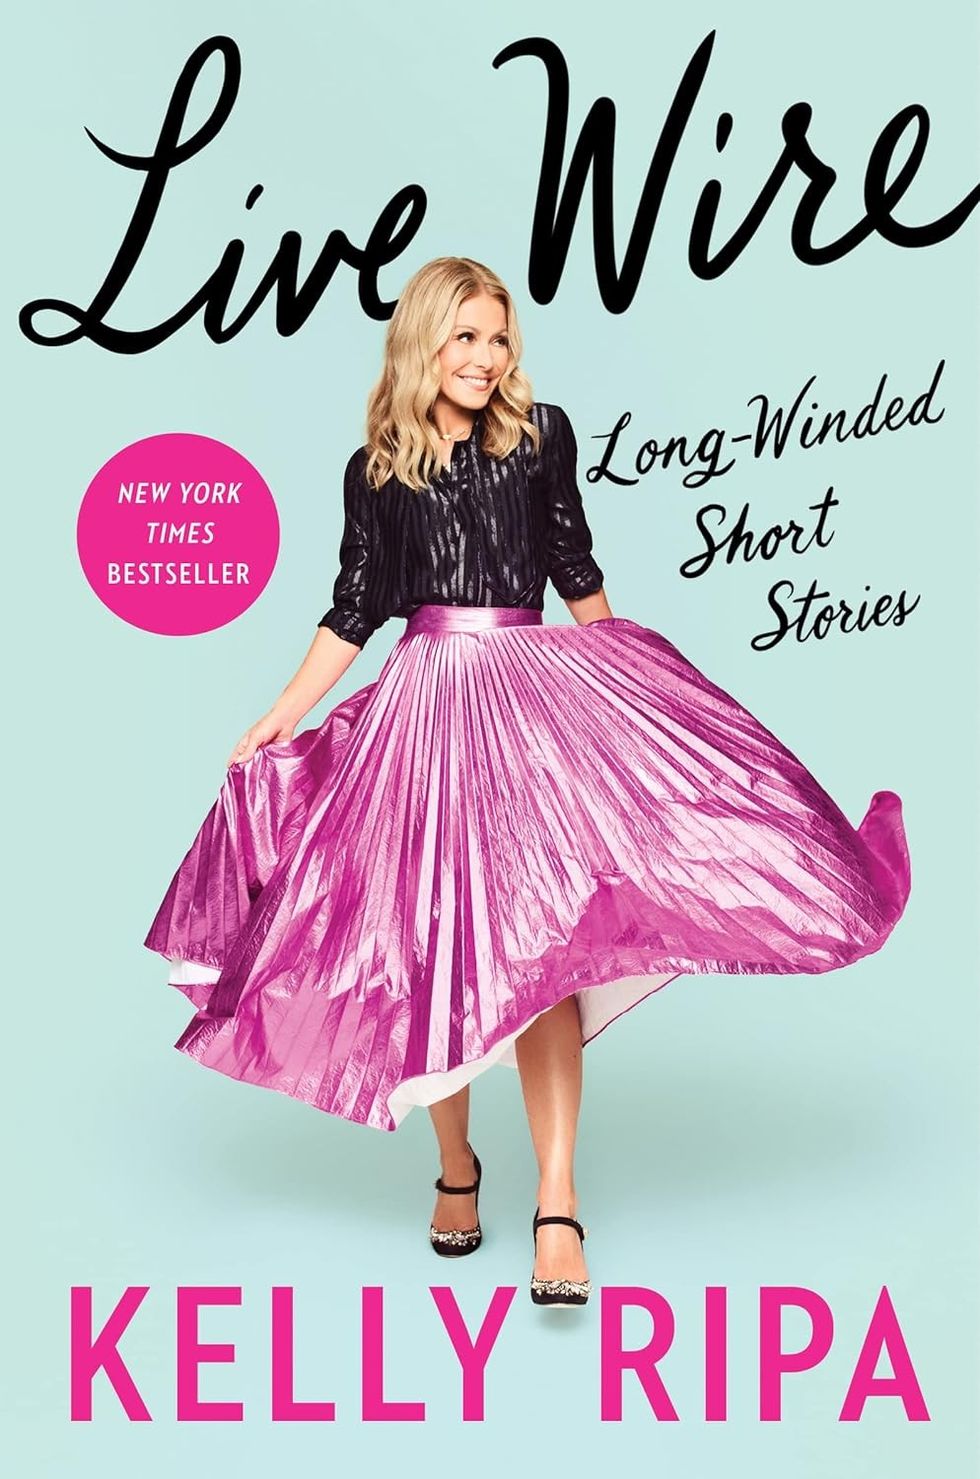 "Live Wire: Long-Winded Short Stories" by Kelly Ripa